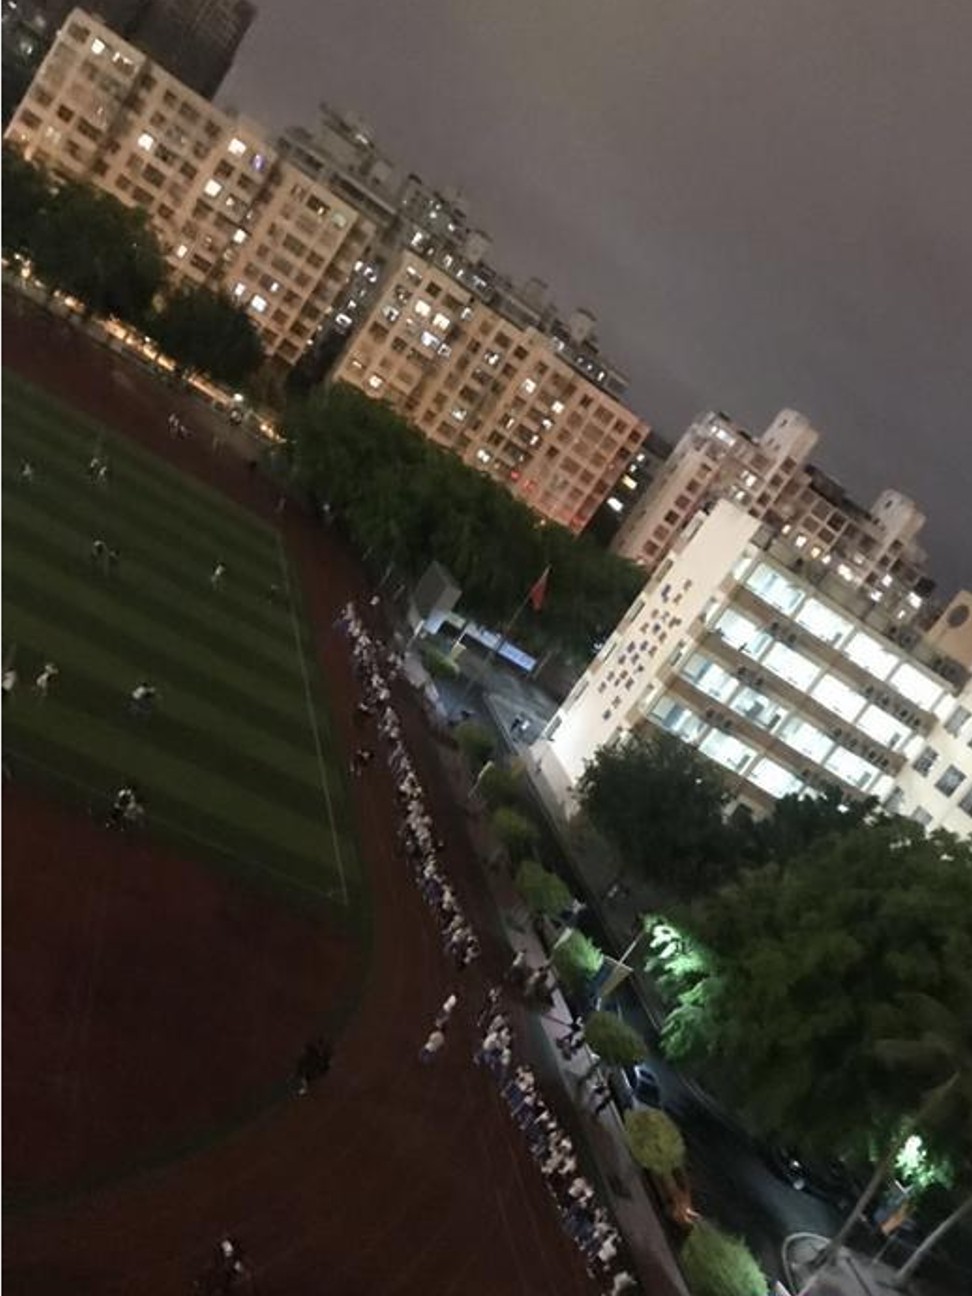 Students are seen in a long queue to enter their dormitories at the middle school in Haikou. Photo: Weibo